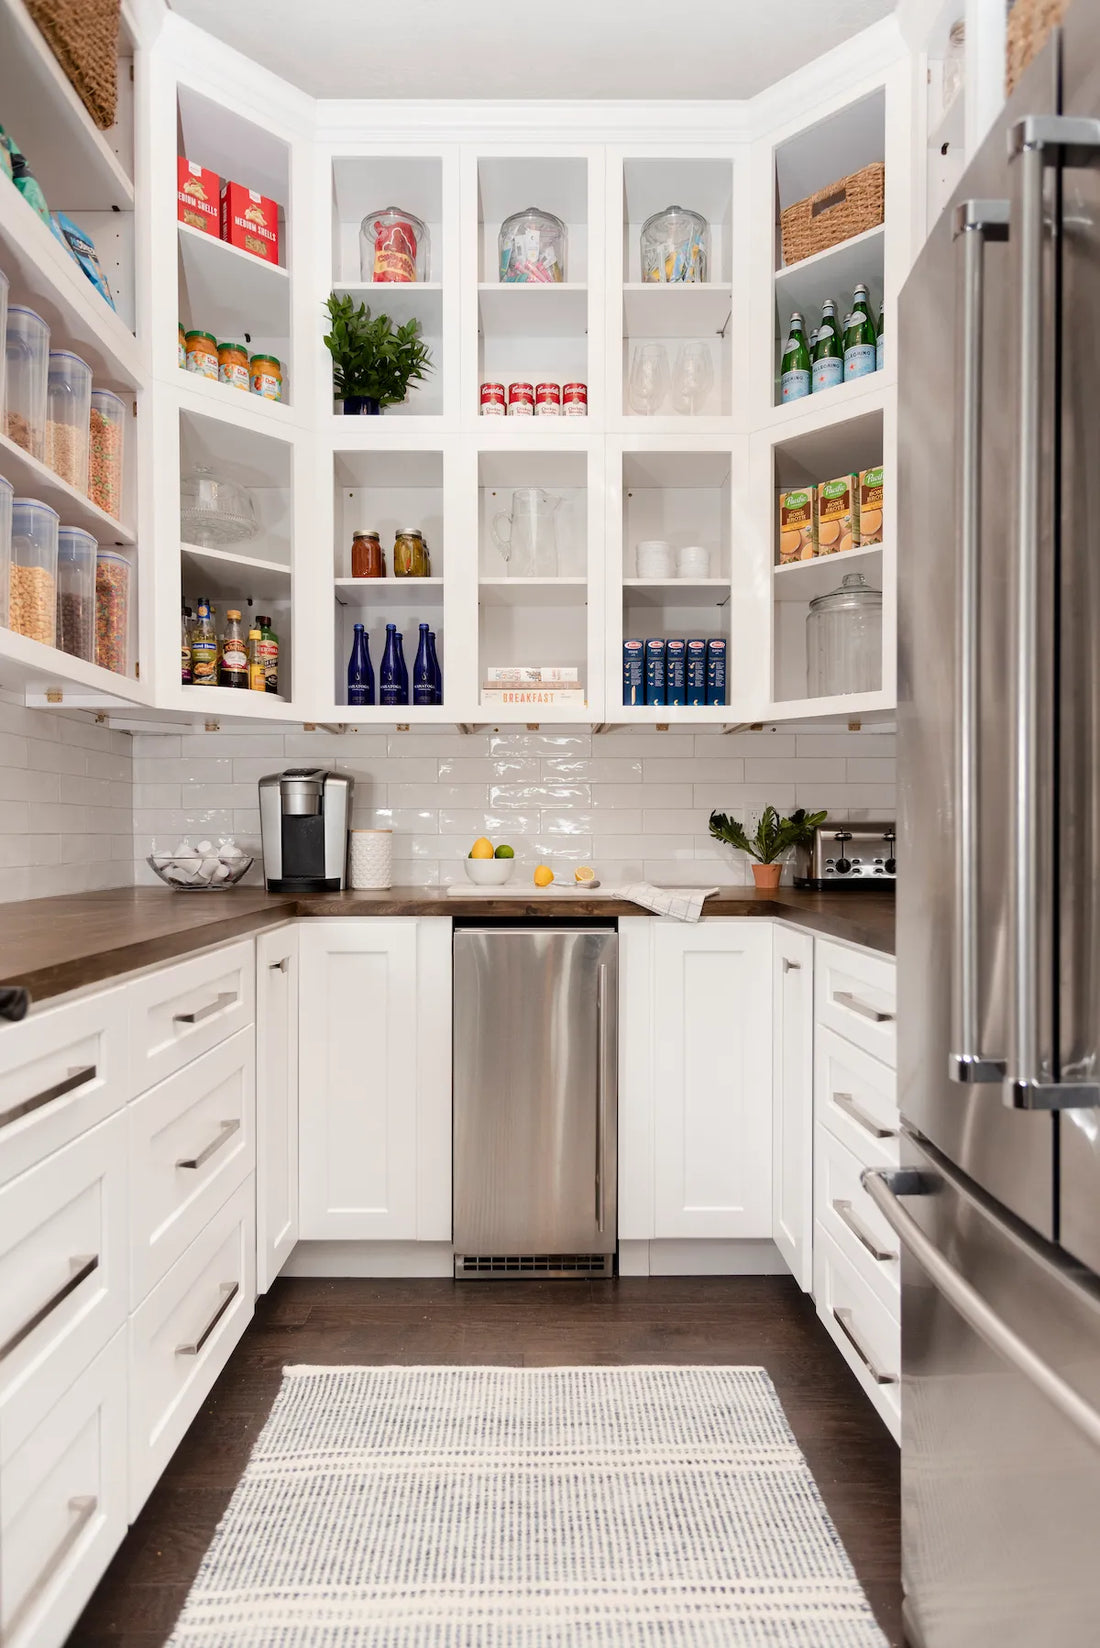 5 Kitchen Pantry Designs, For Homes of All Sizes